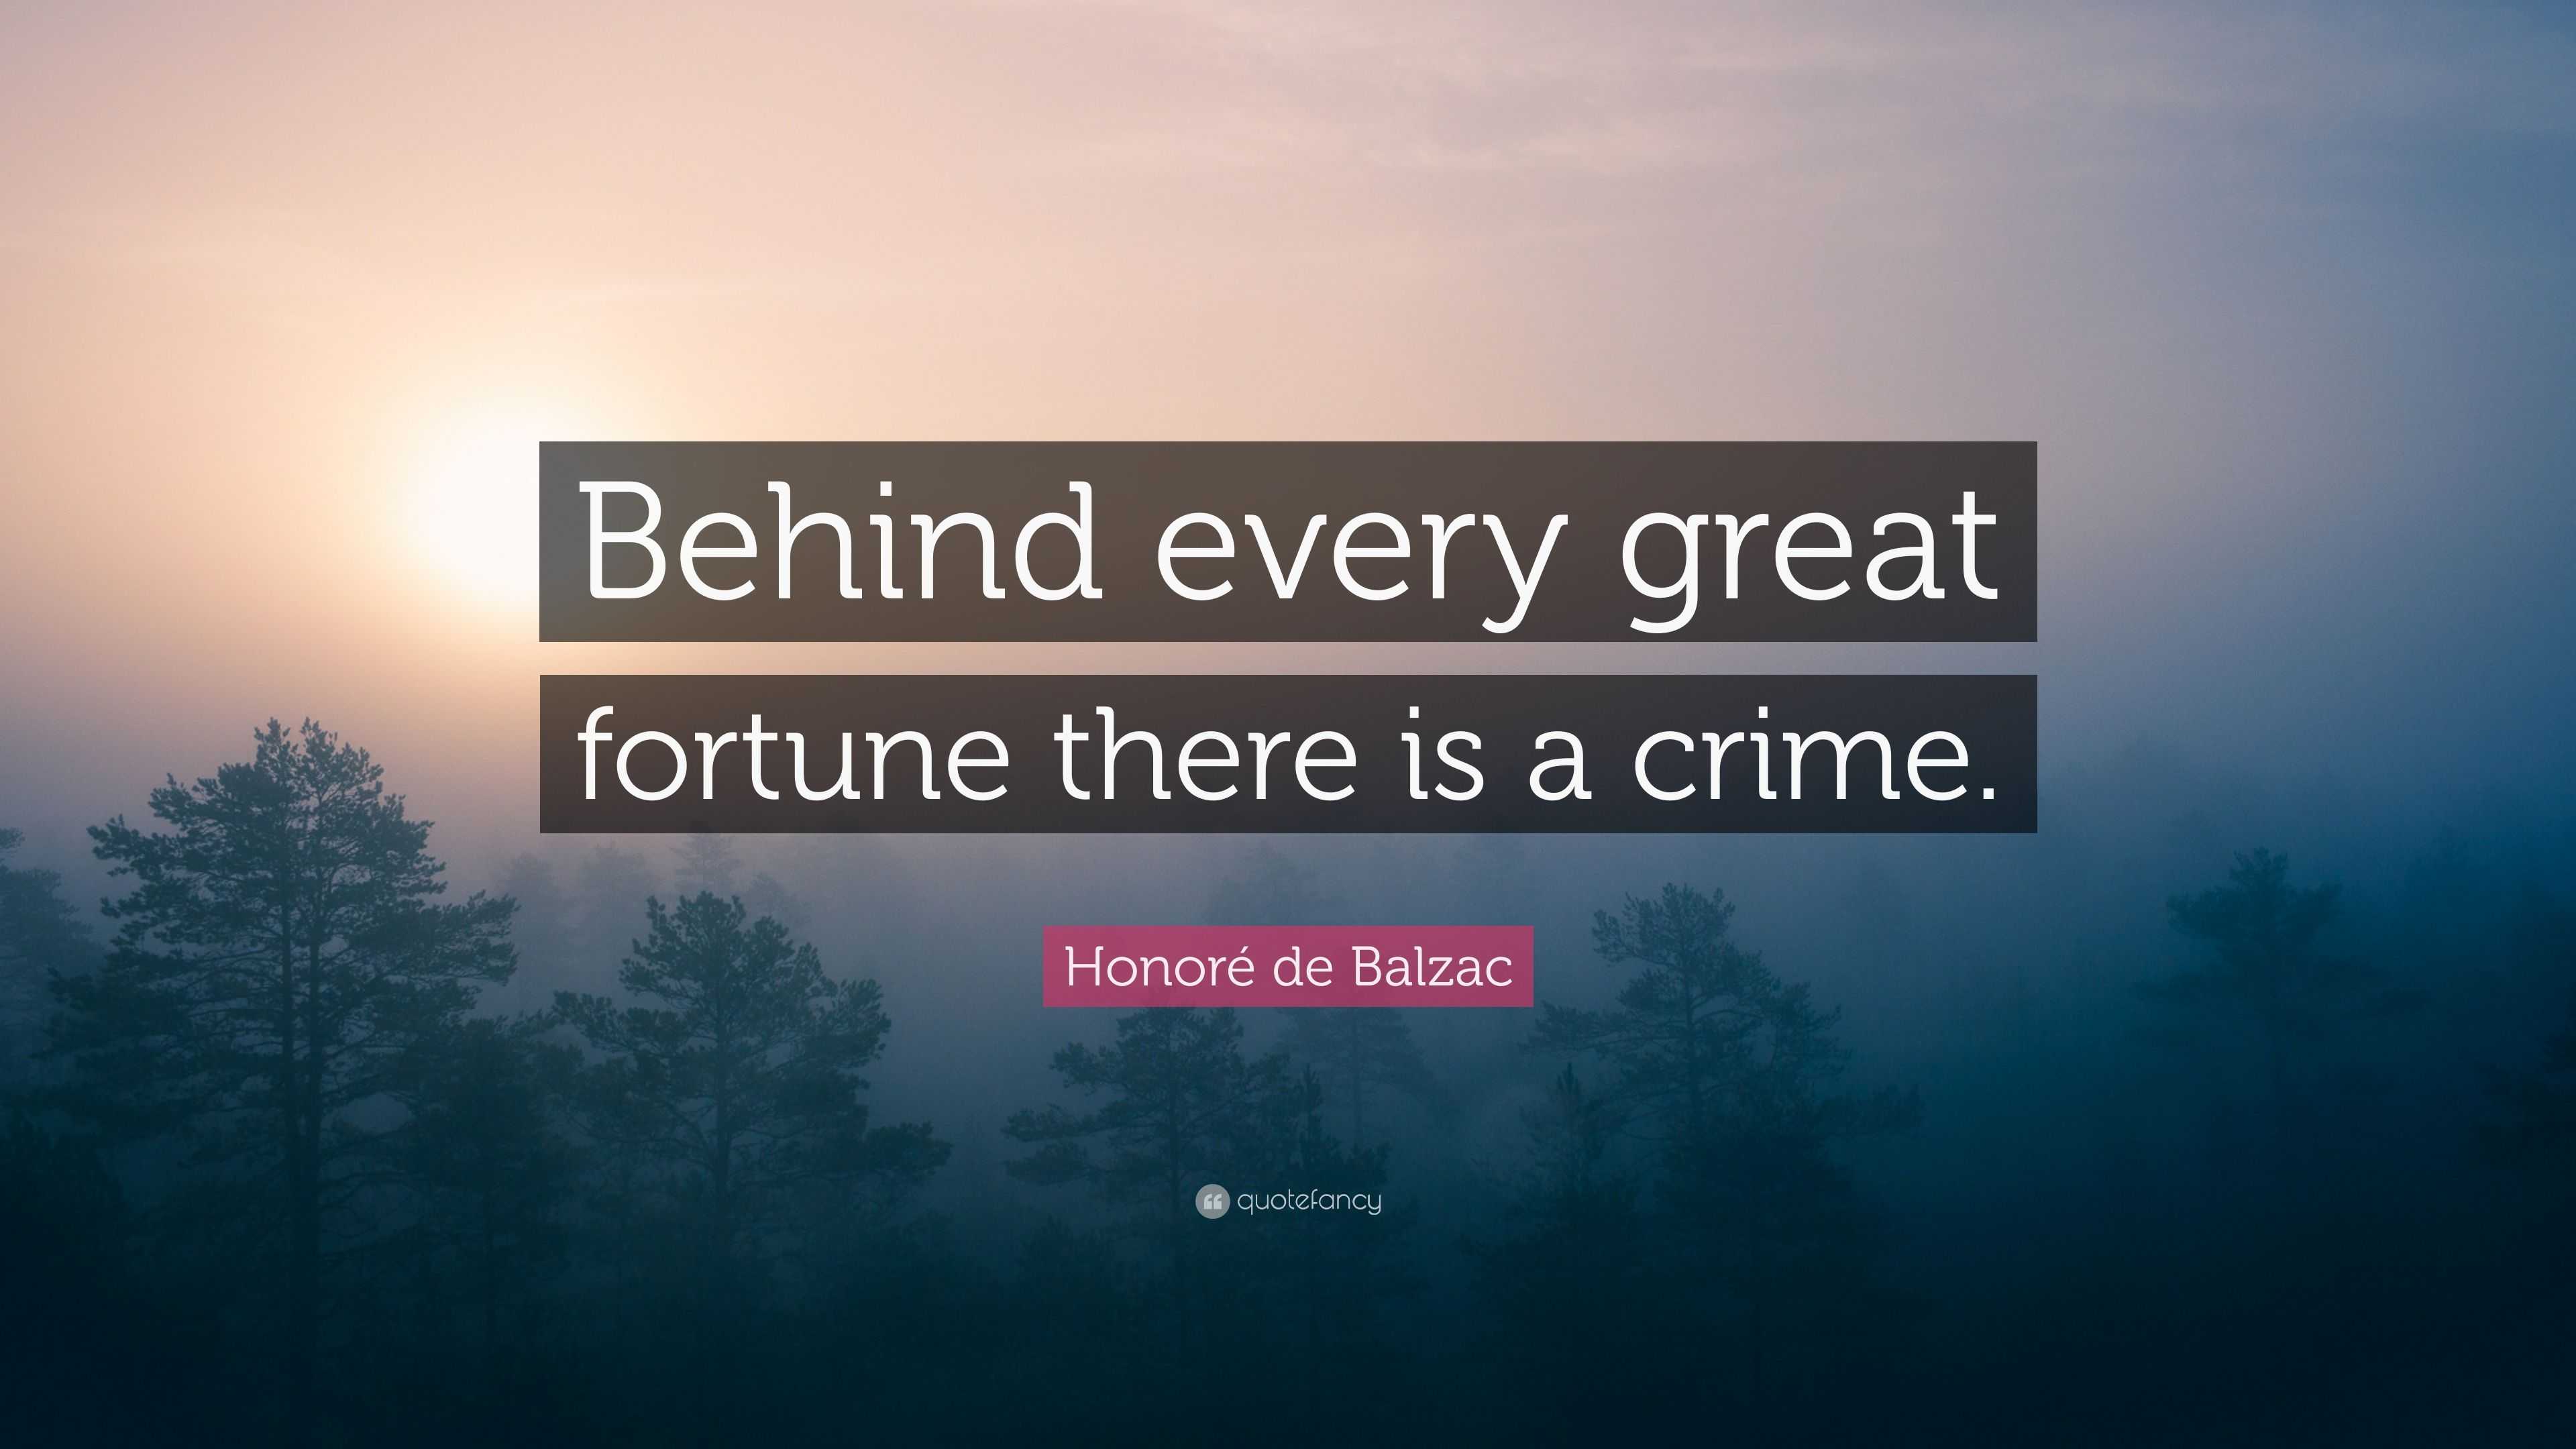 Honoré de Balzac Quote: “Behind every great fortune there is a crime.” (9 ...3840 x 2160